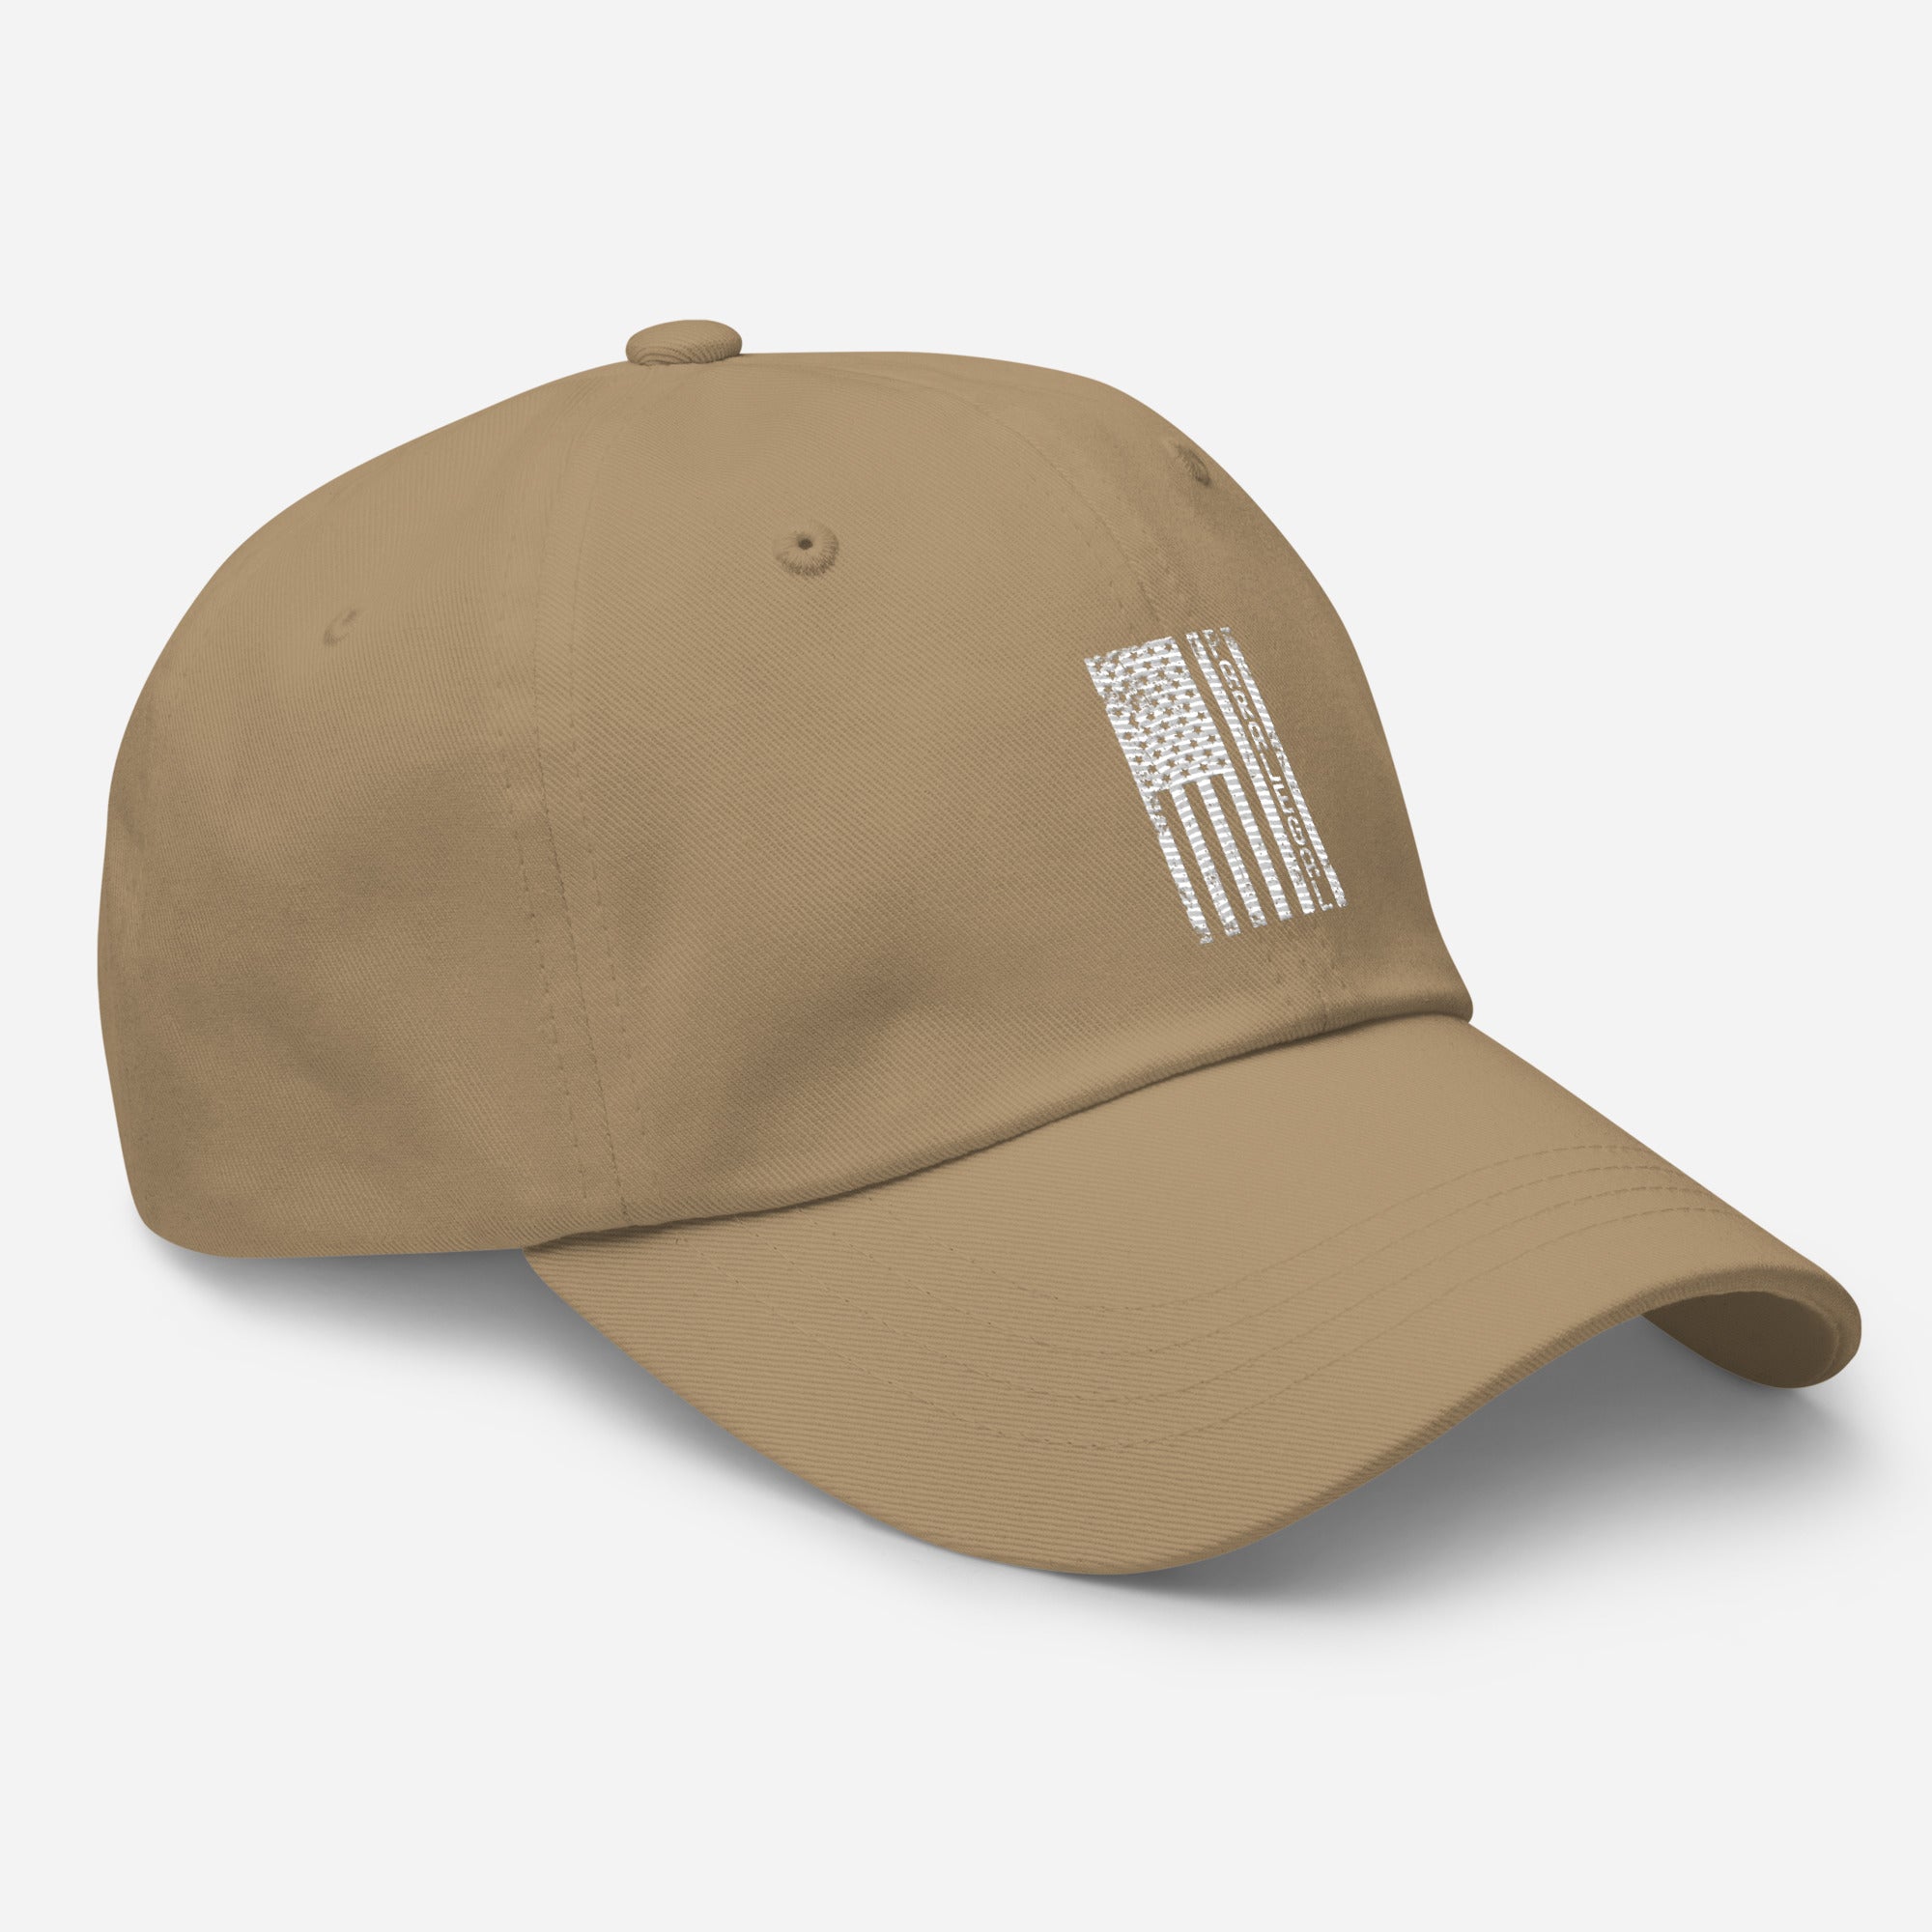 Hat | Paralegal (deisgn on American flag)